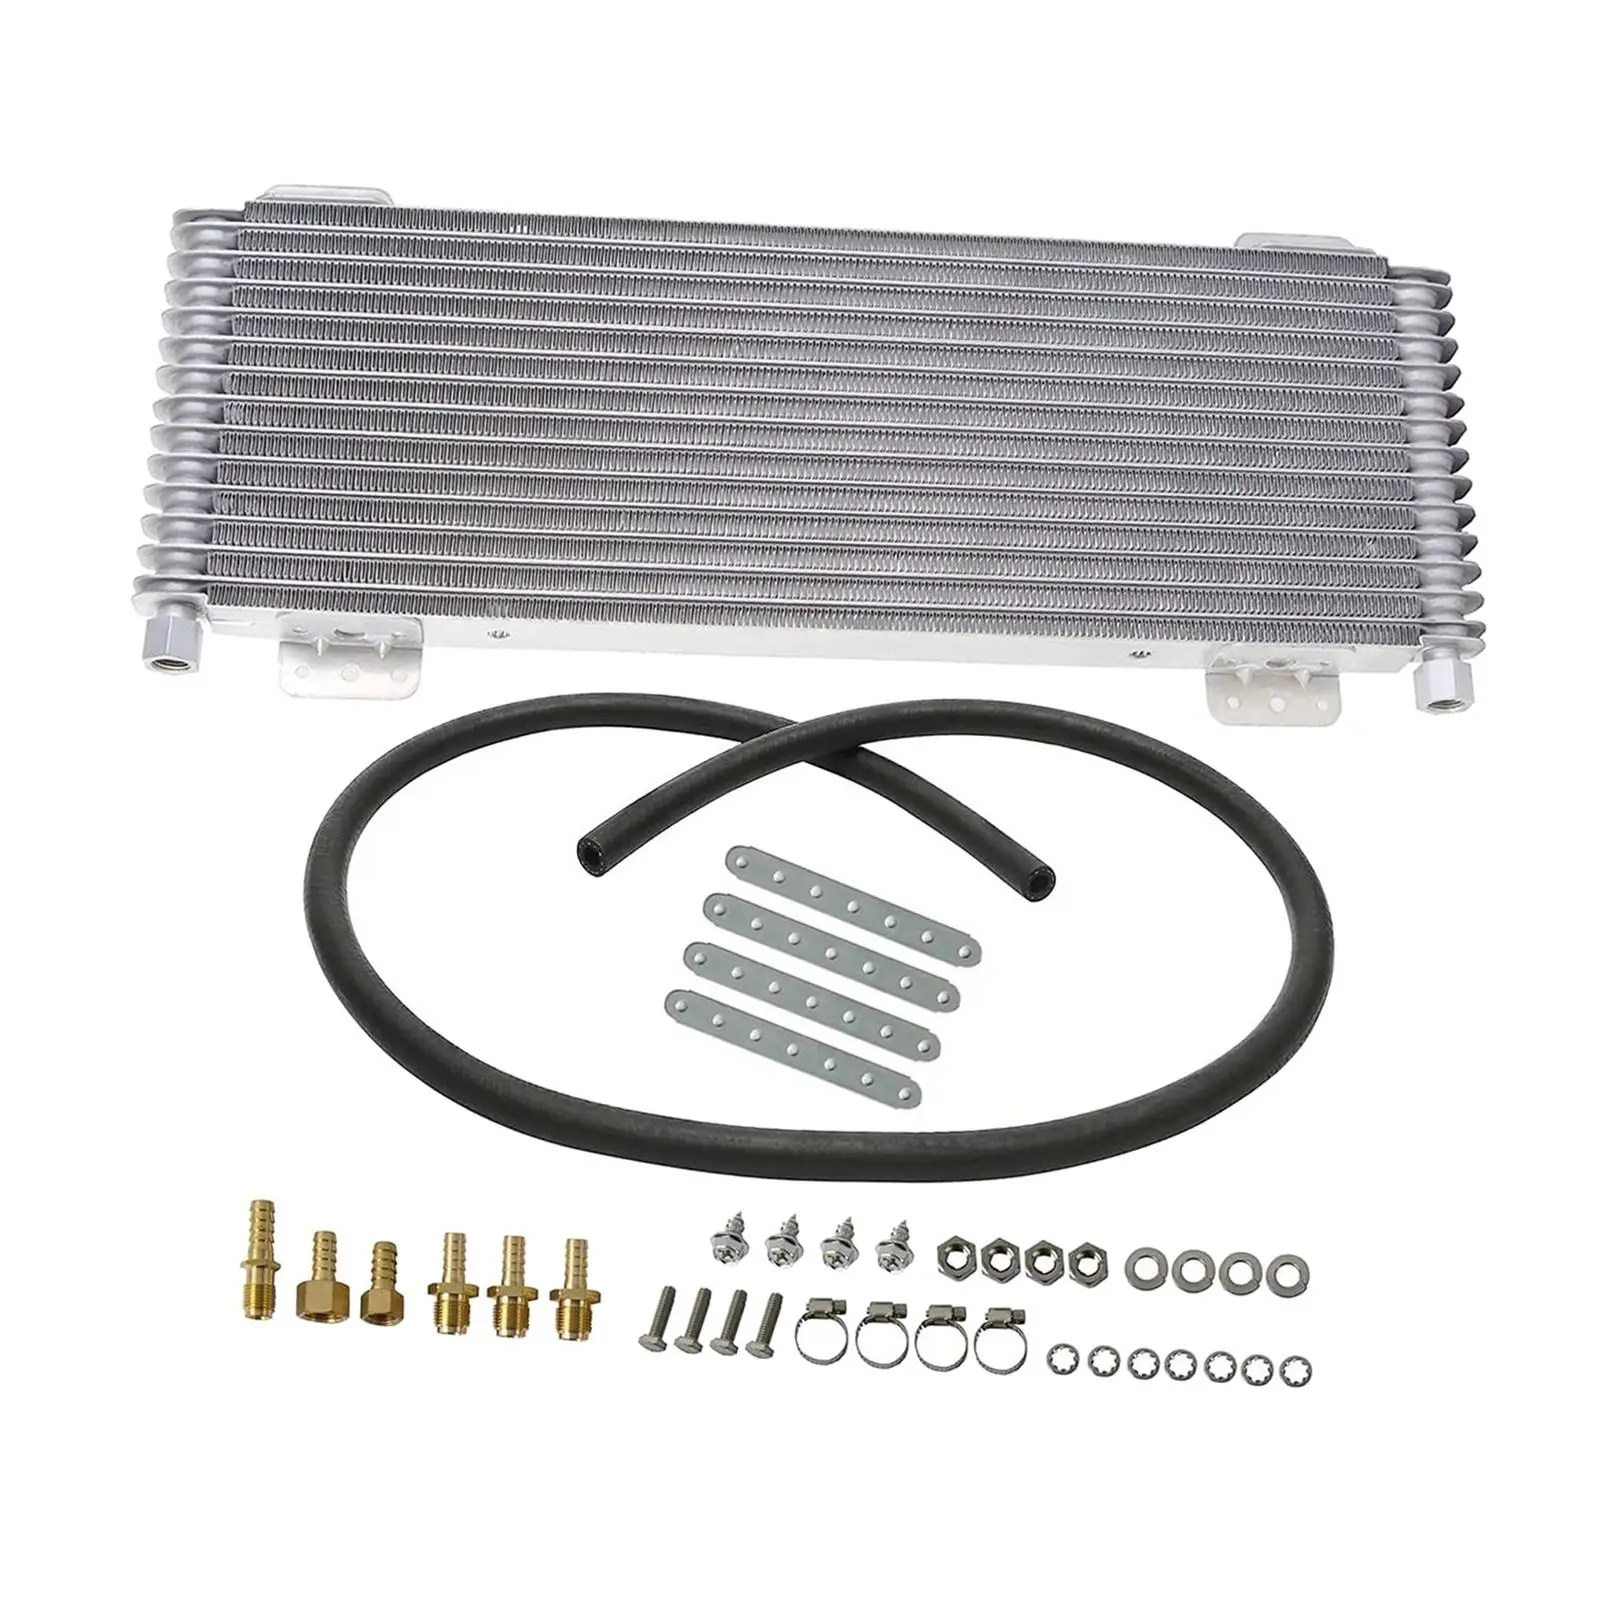 Transmission Oil Cooler Low Pressure Drop LPD47391 Towing Applications Replacement  Easy to Install